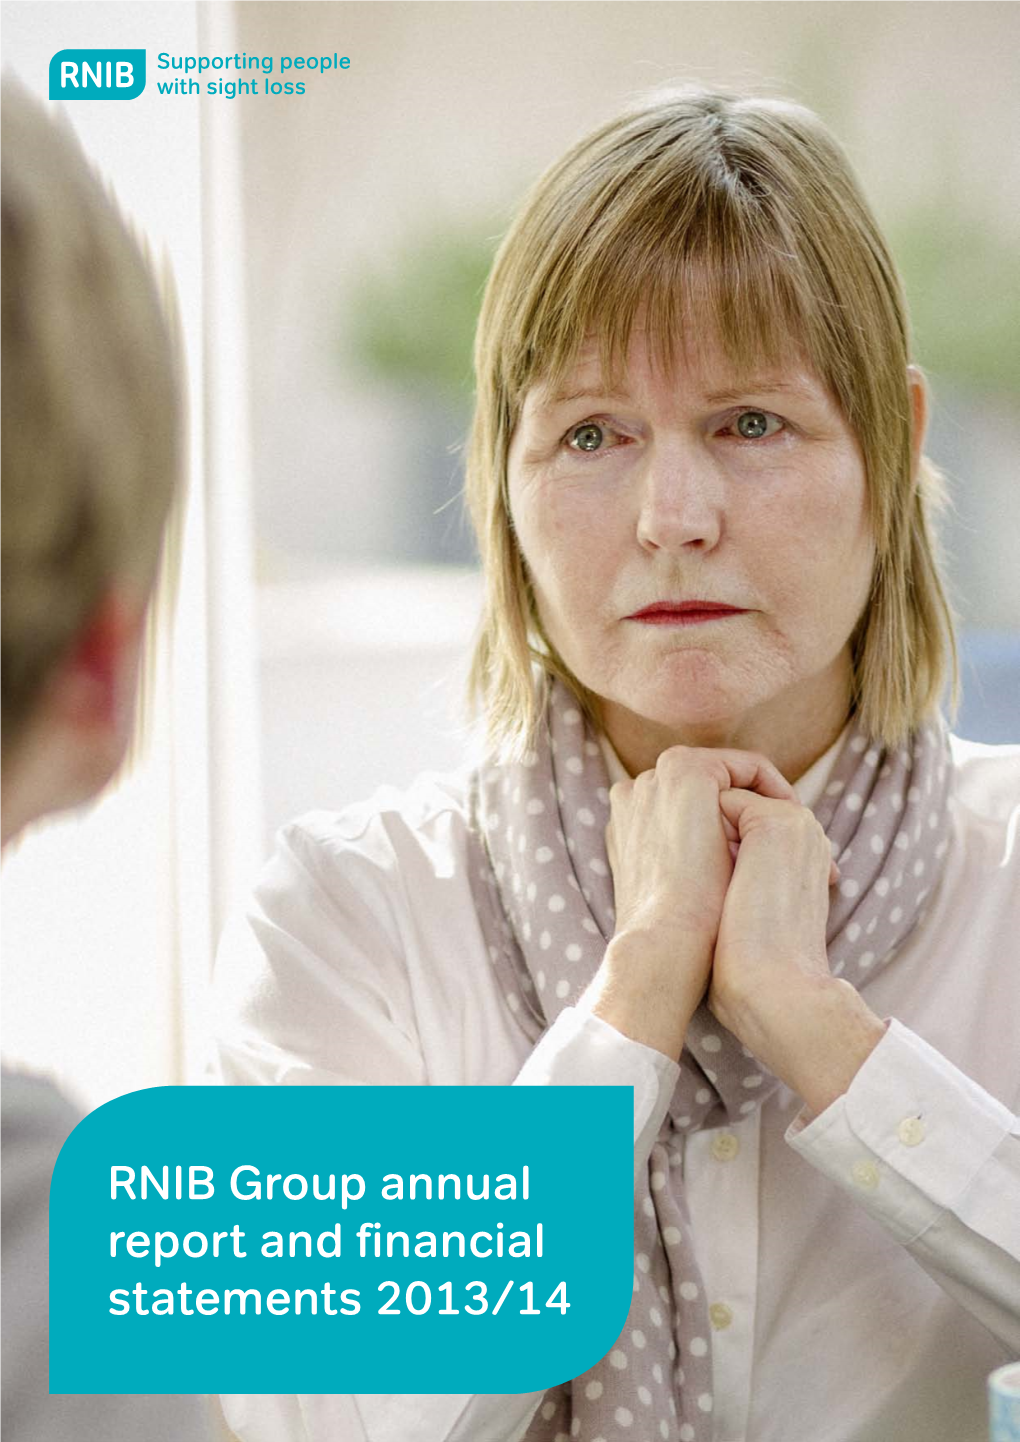 RNIB Group Annual Report and Financial Statements 2013/14